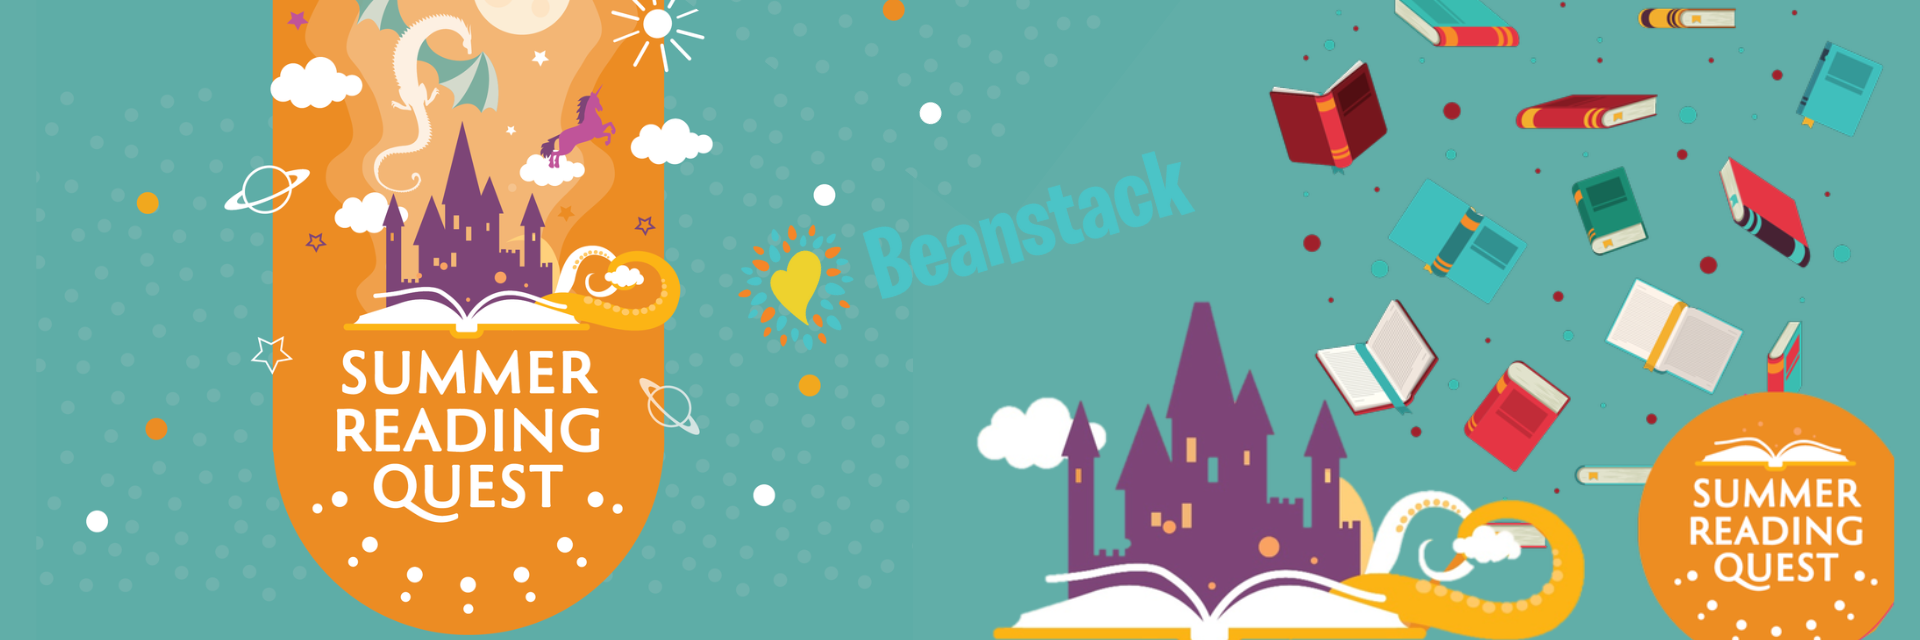 Summer Reading Quest logo with a floating book background and mythical images including dragons, unicorns and a purple castle. 